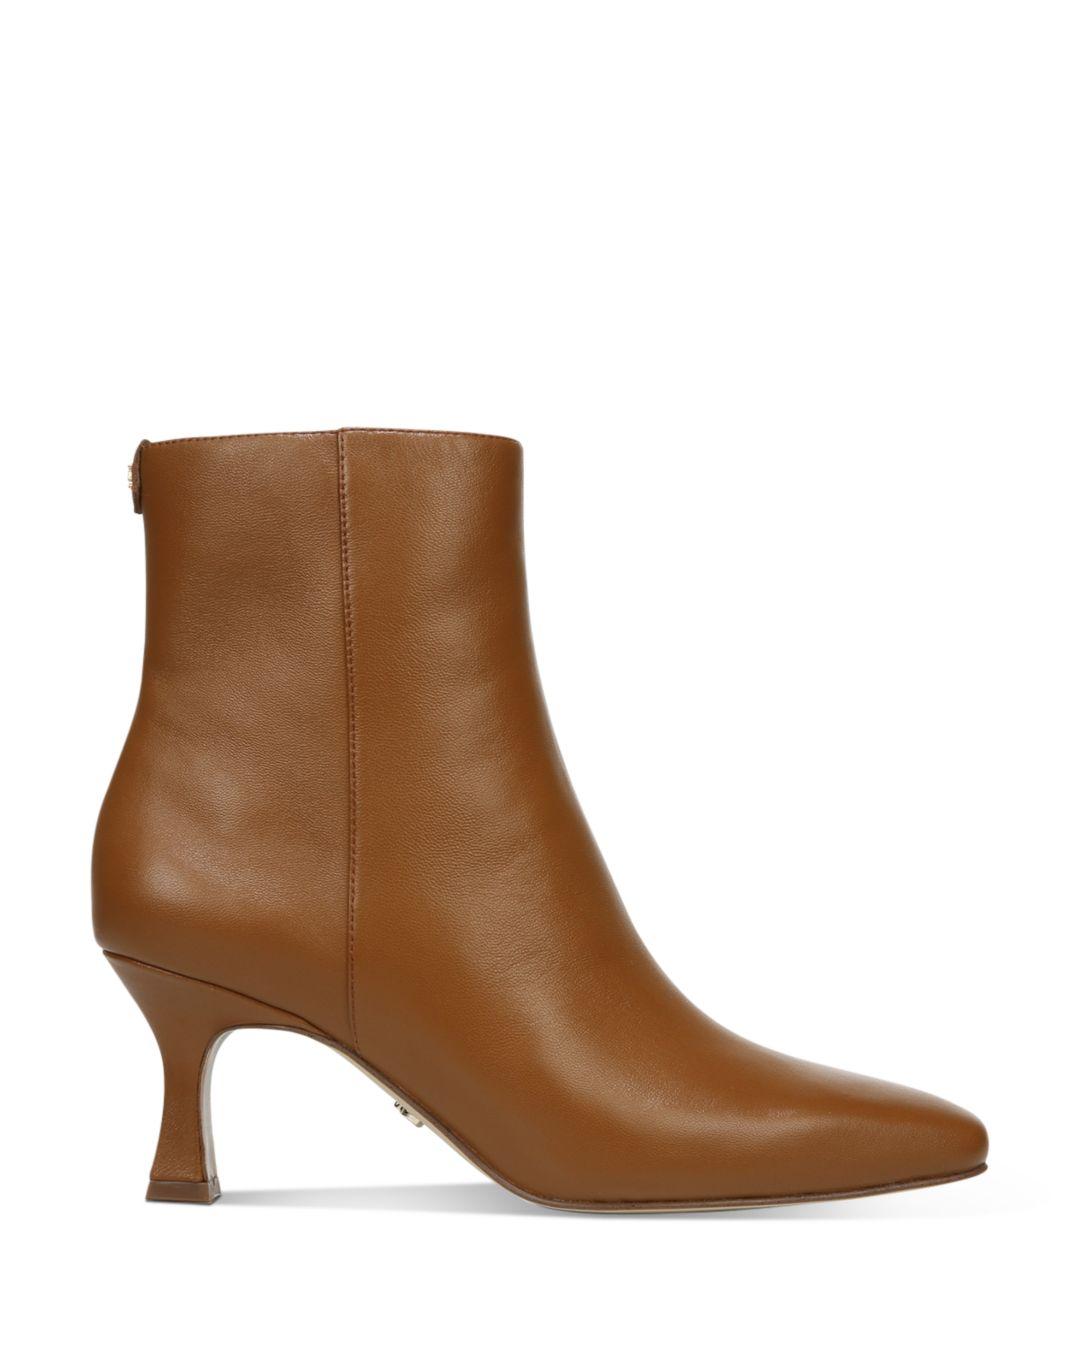 Sam Edelman Leather Women's Lizzo Booties in Brown - Lyst